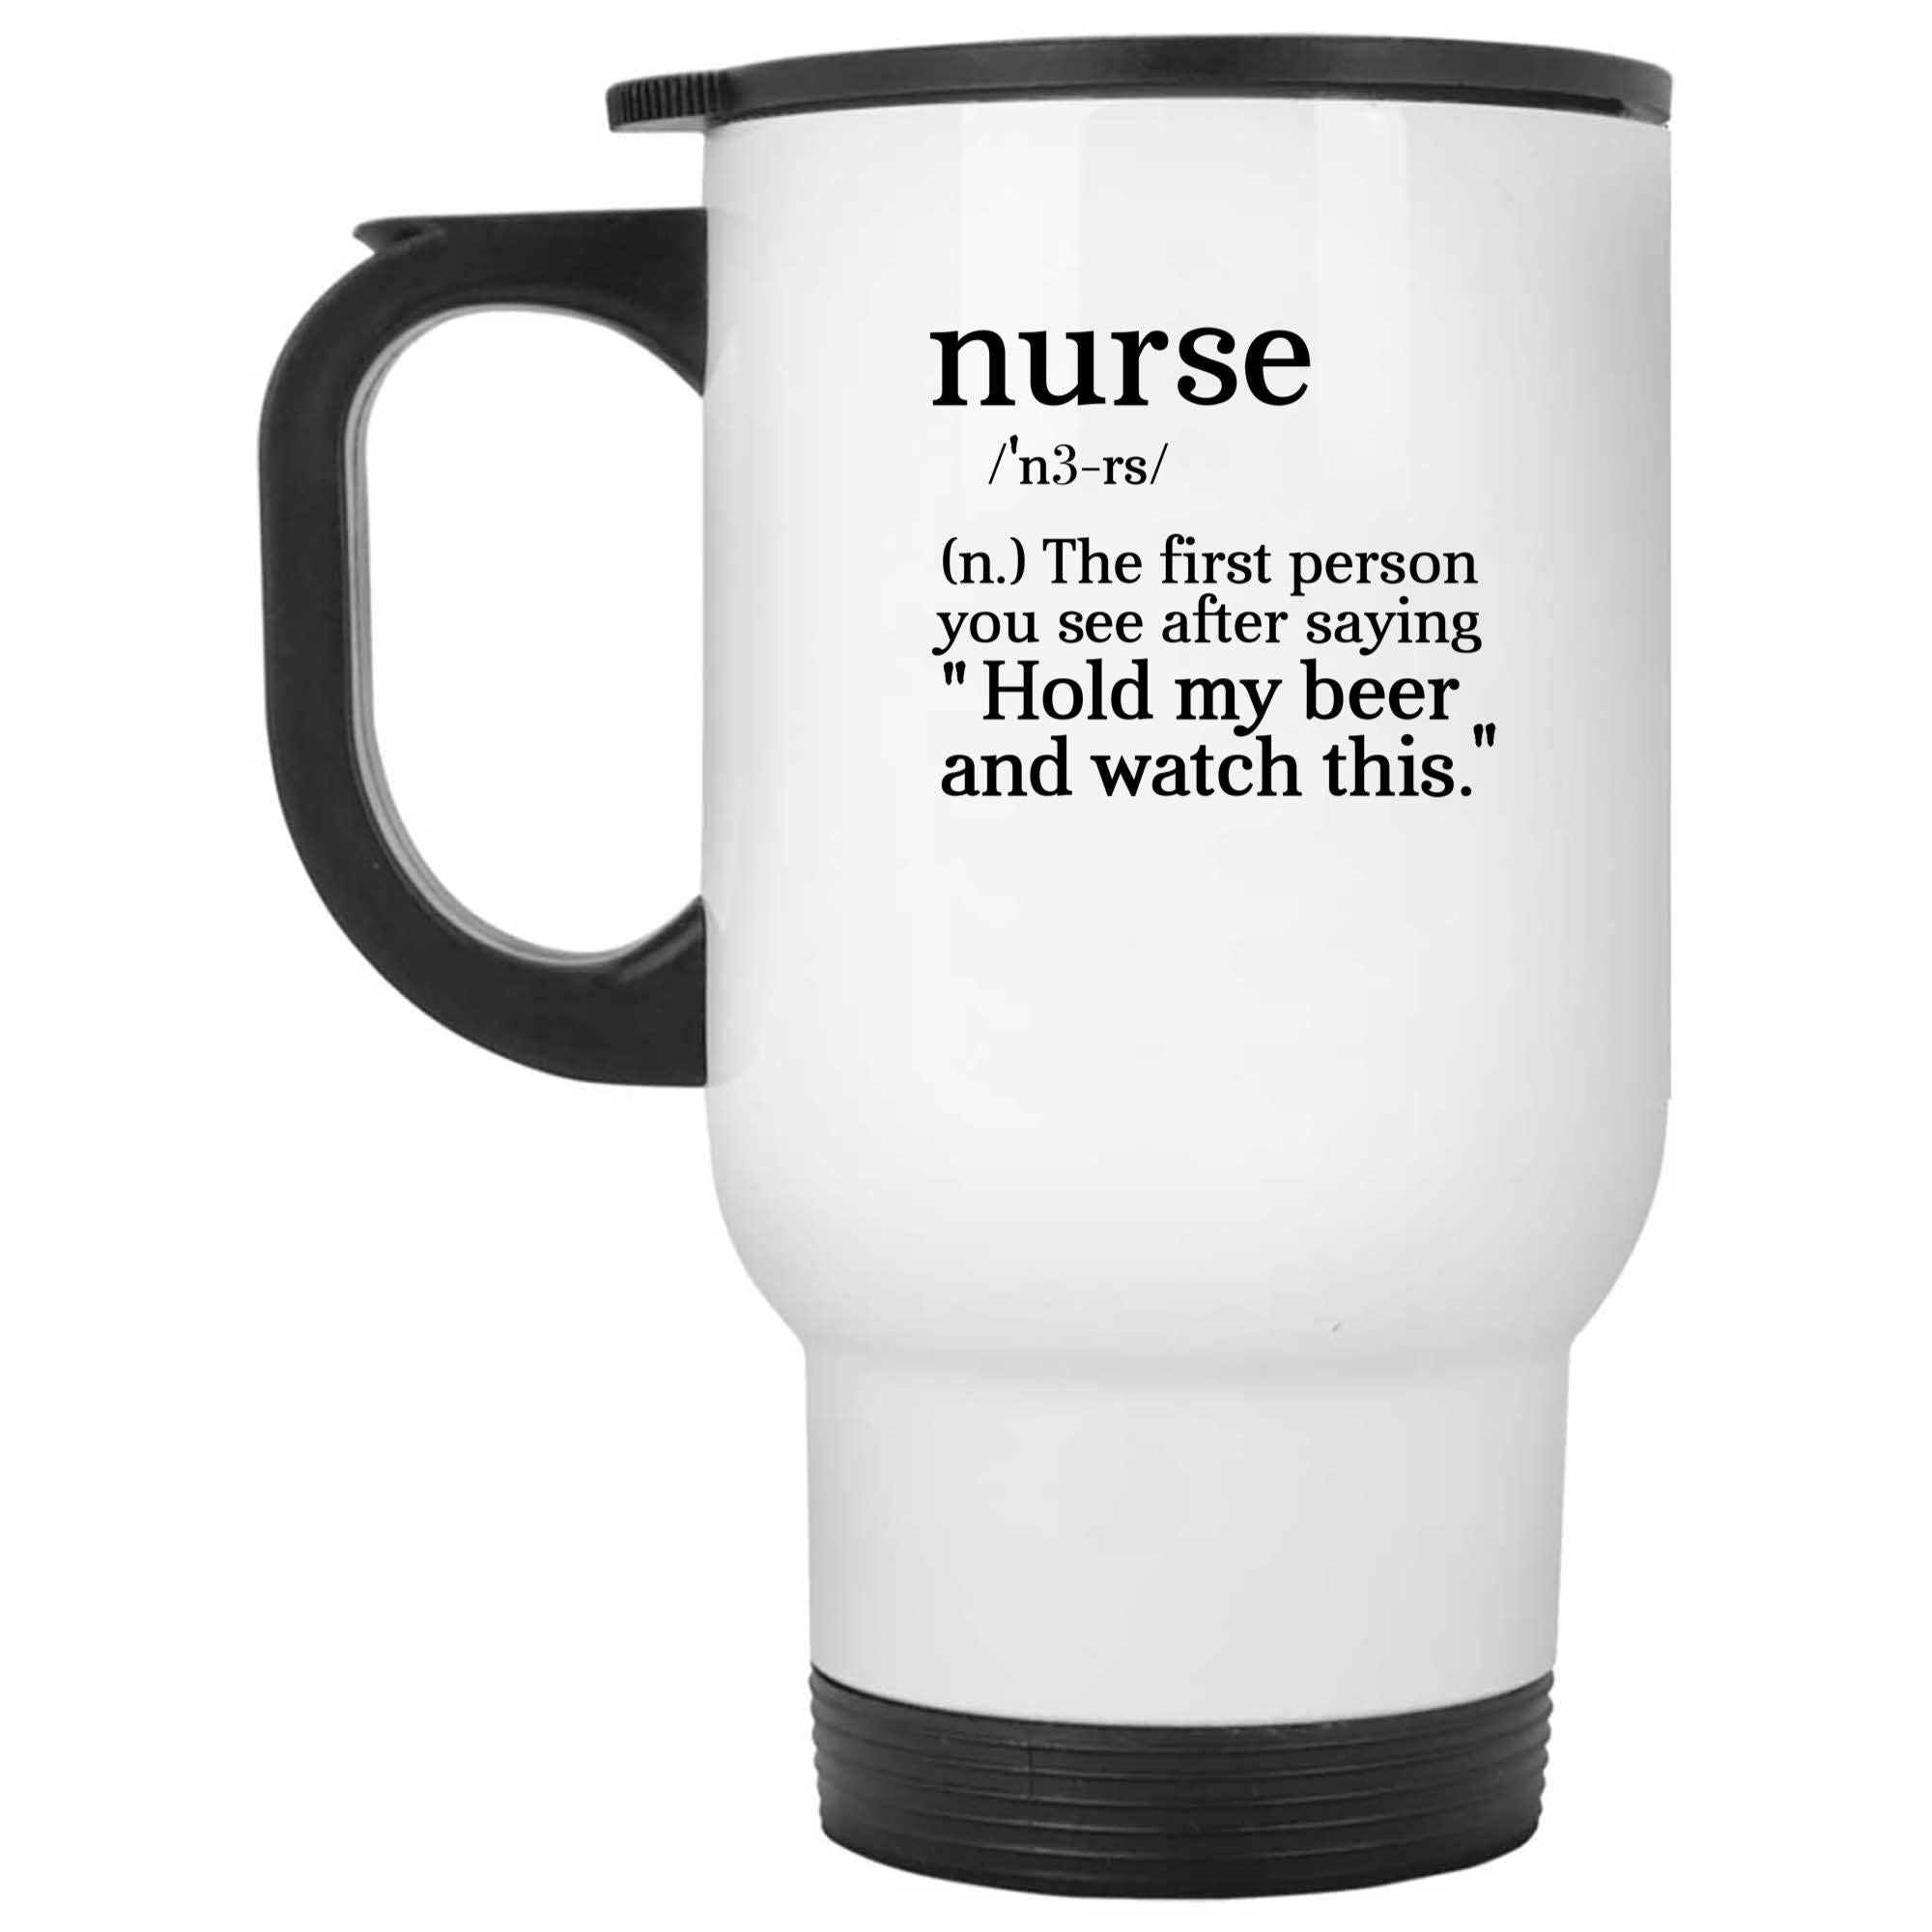 Skitongifts Funny Ceramic Novelty Coffee Mug Nurse The First Person You See After Saying Hold My Beer And Watch This gQNEU27